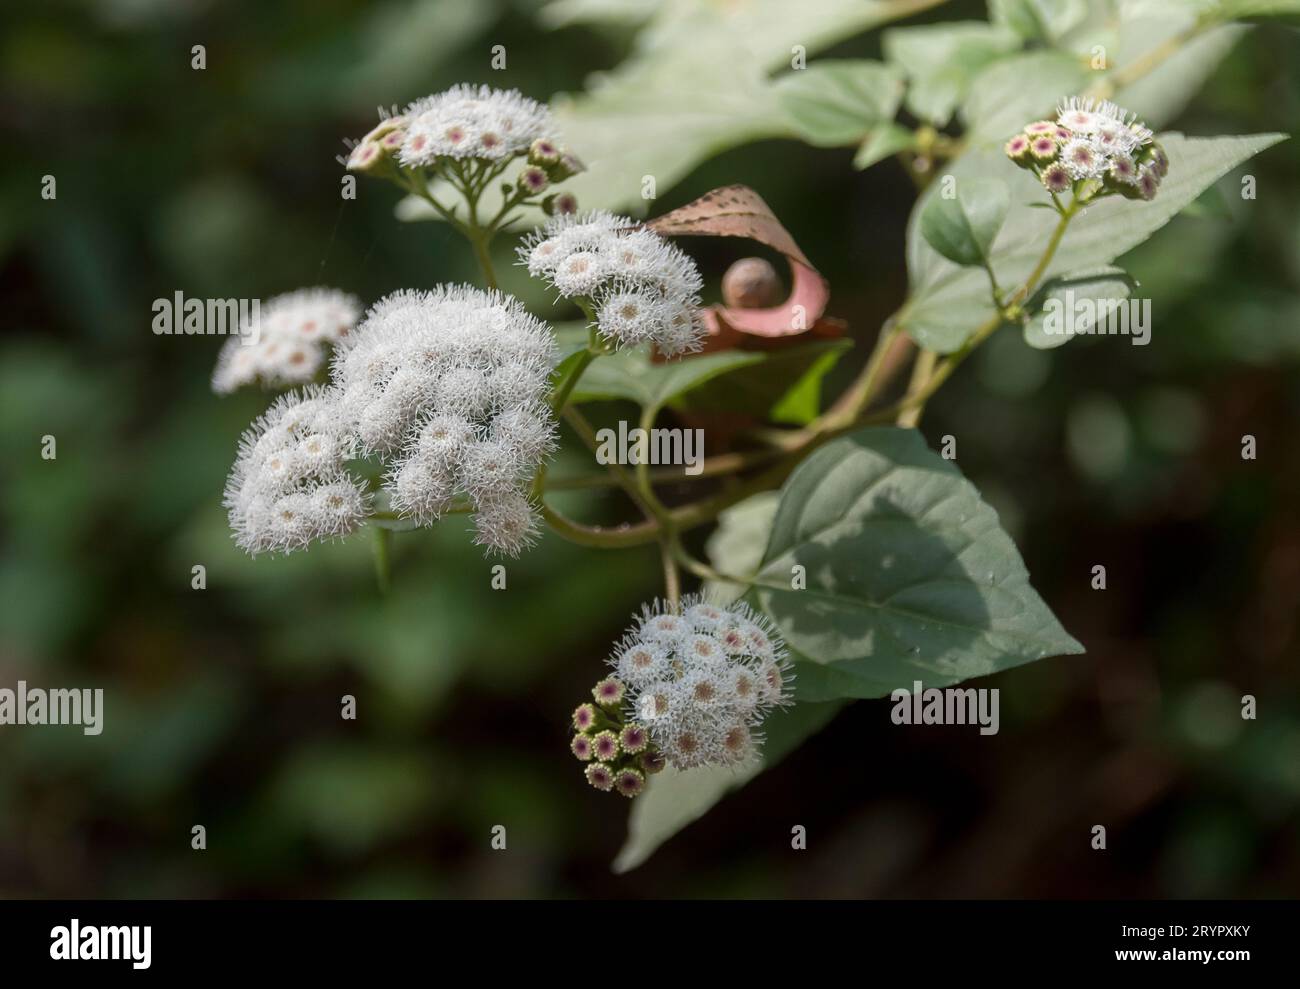 Flowers and leaves of Crofton weed, ageratina adenophora, on edge of sub-tropical rainforest, Queensland,Australia. Invasive weed, poisonous to horses Stock Photo